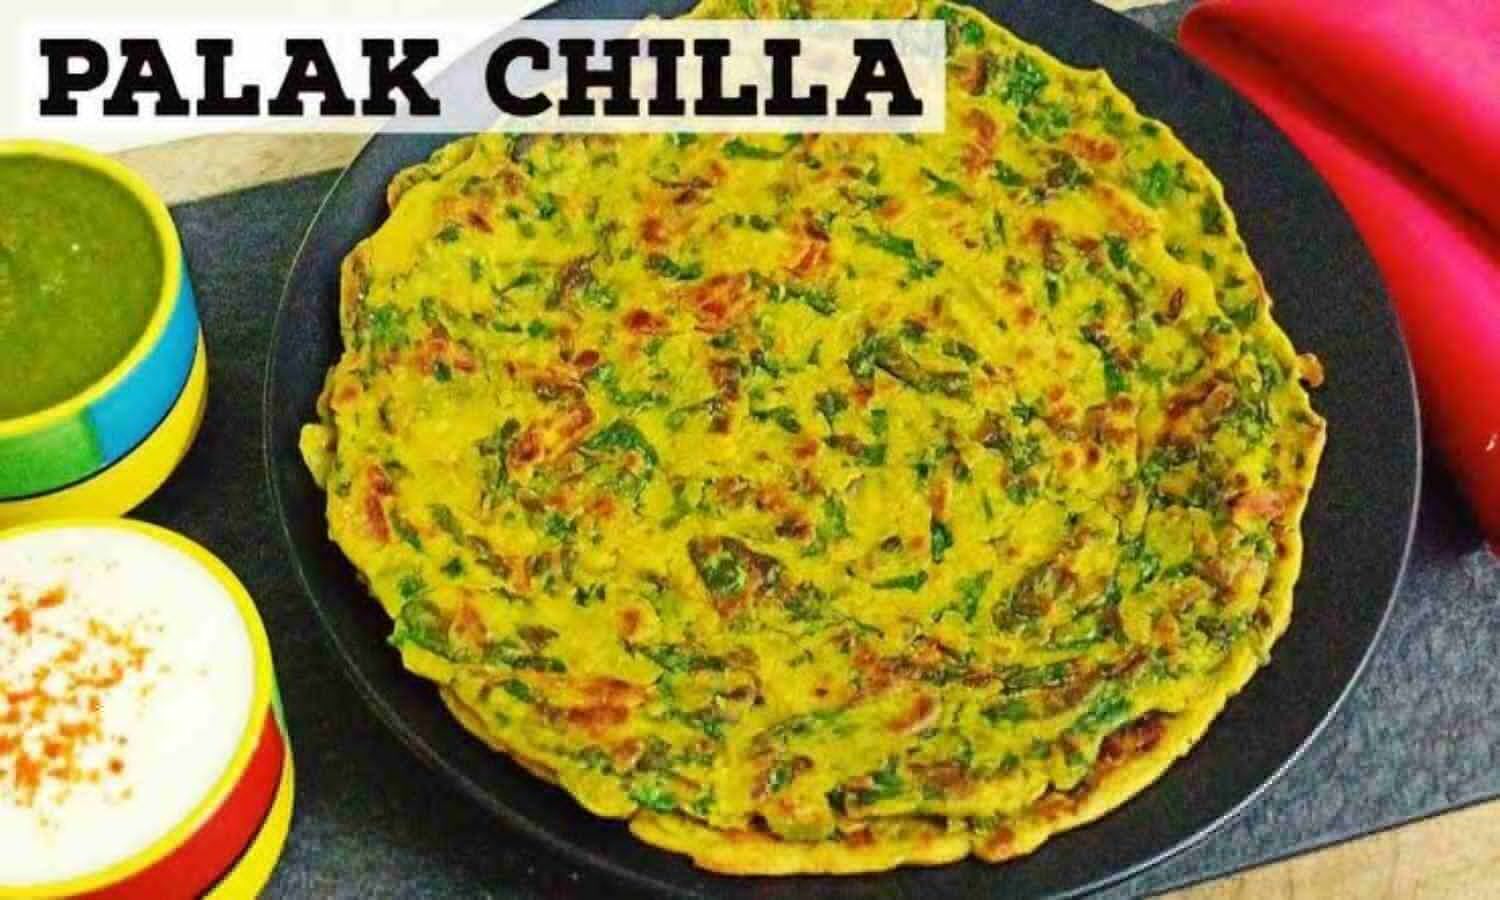 Palak Cheela Recipe: Make Palak Cheela in this way for breakfast, it is best in both taste and health